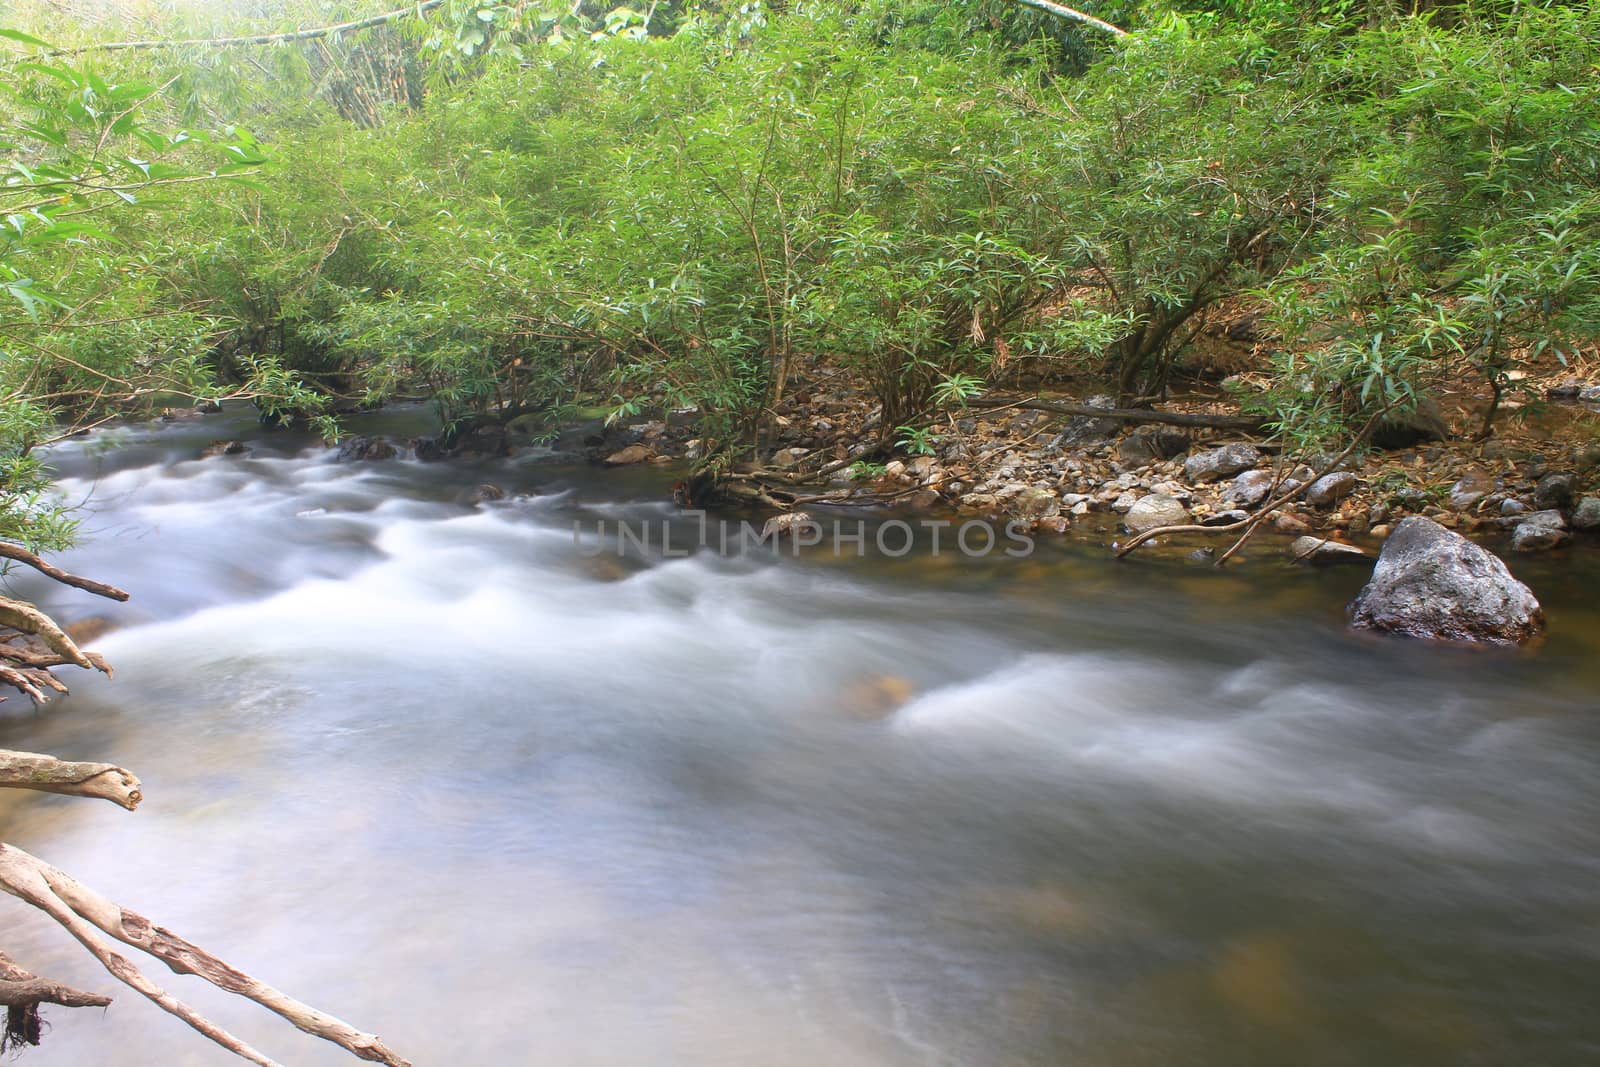 River in deep forest, river in evergreen forest in Thailand 